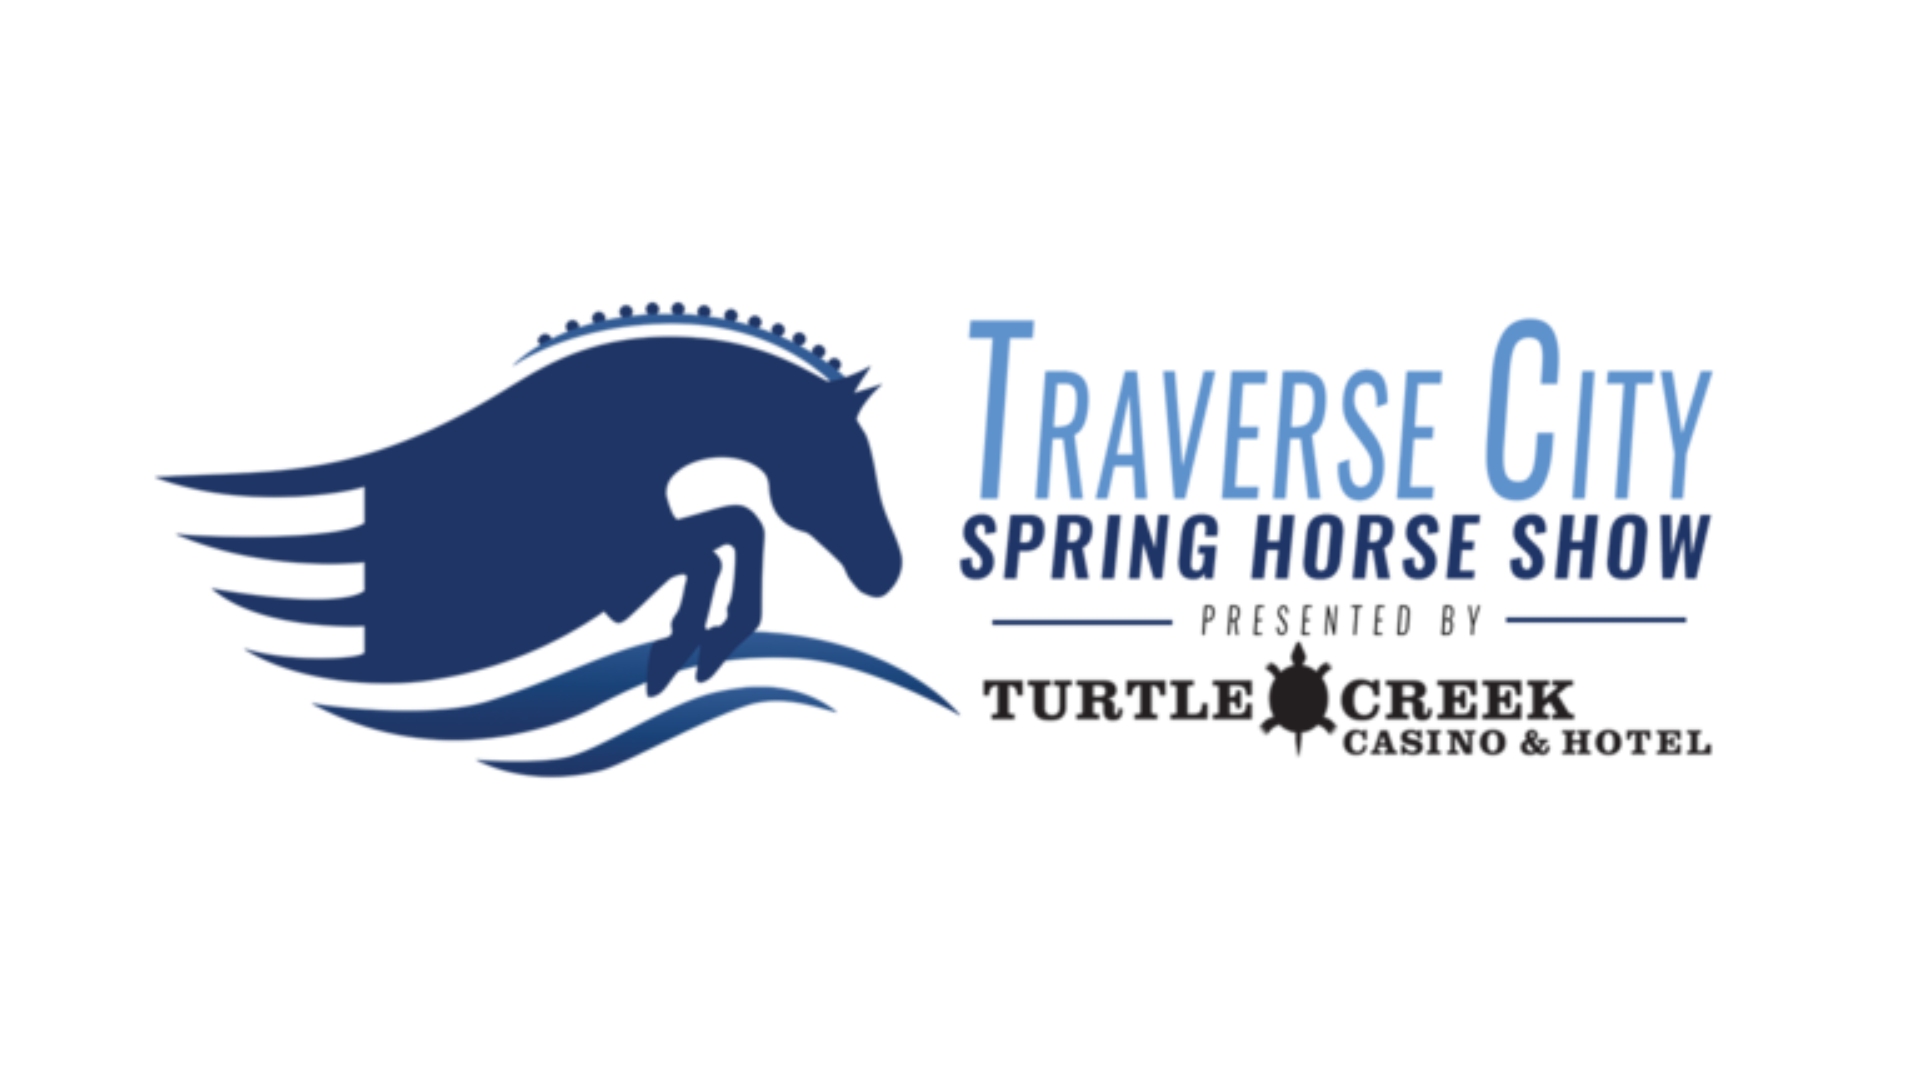 EA Limited Inc. proudly sold at the Traverse City Spring Horse Shows in Traverse City, MI.